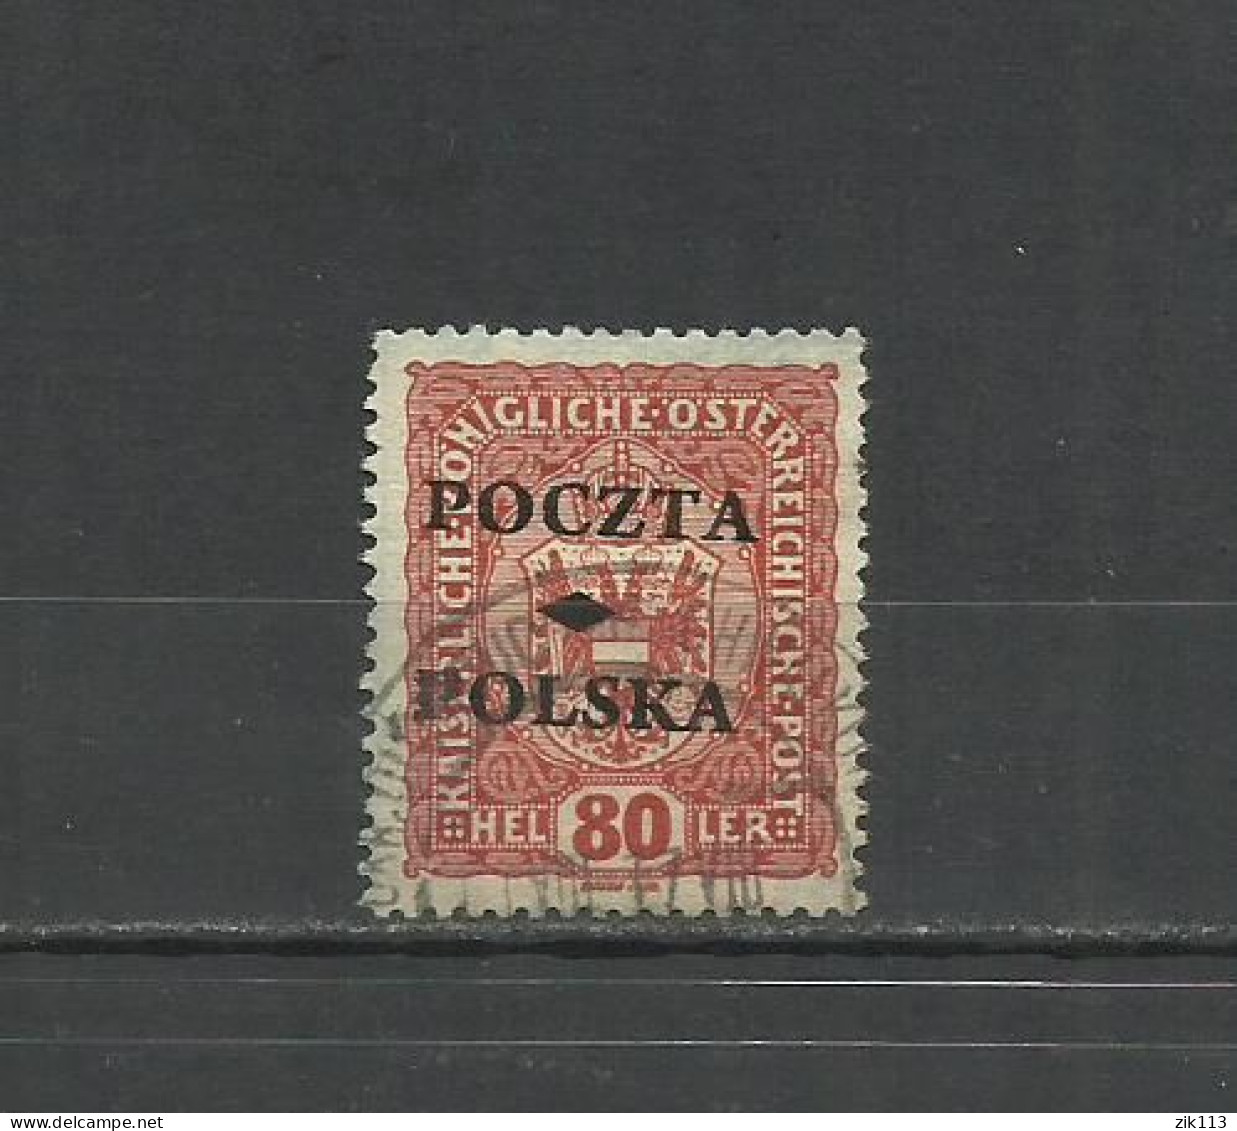 Poland 1919 - Krakow Fi. 43 (Mi.41) , Used, Forgery - Used Stamps